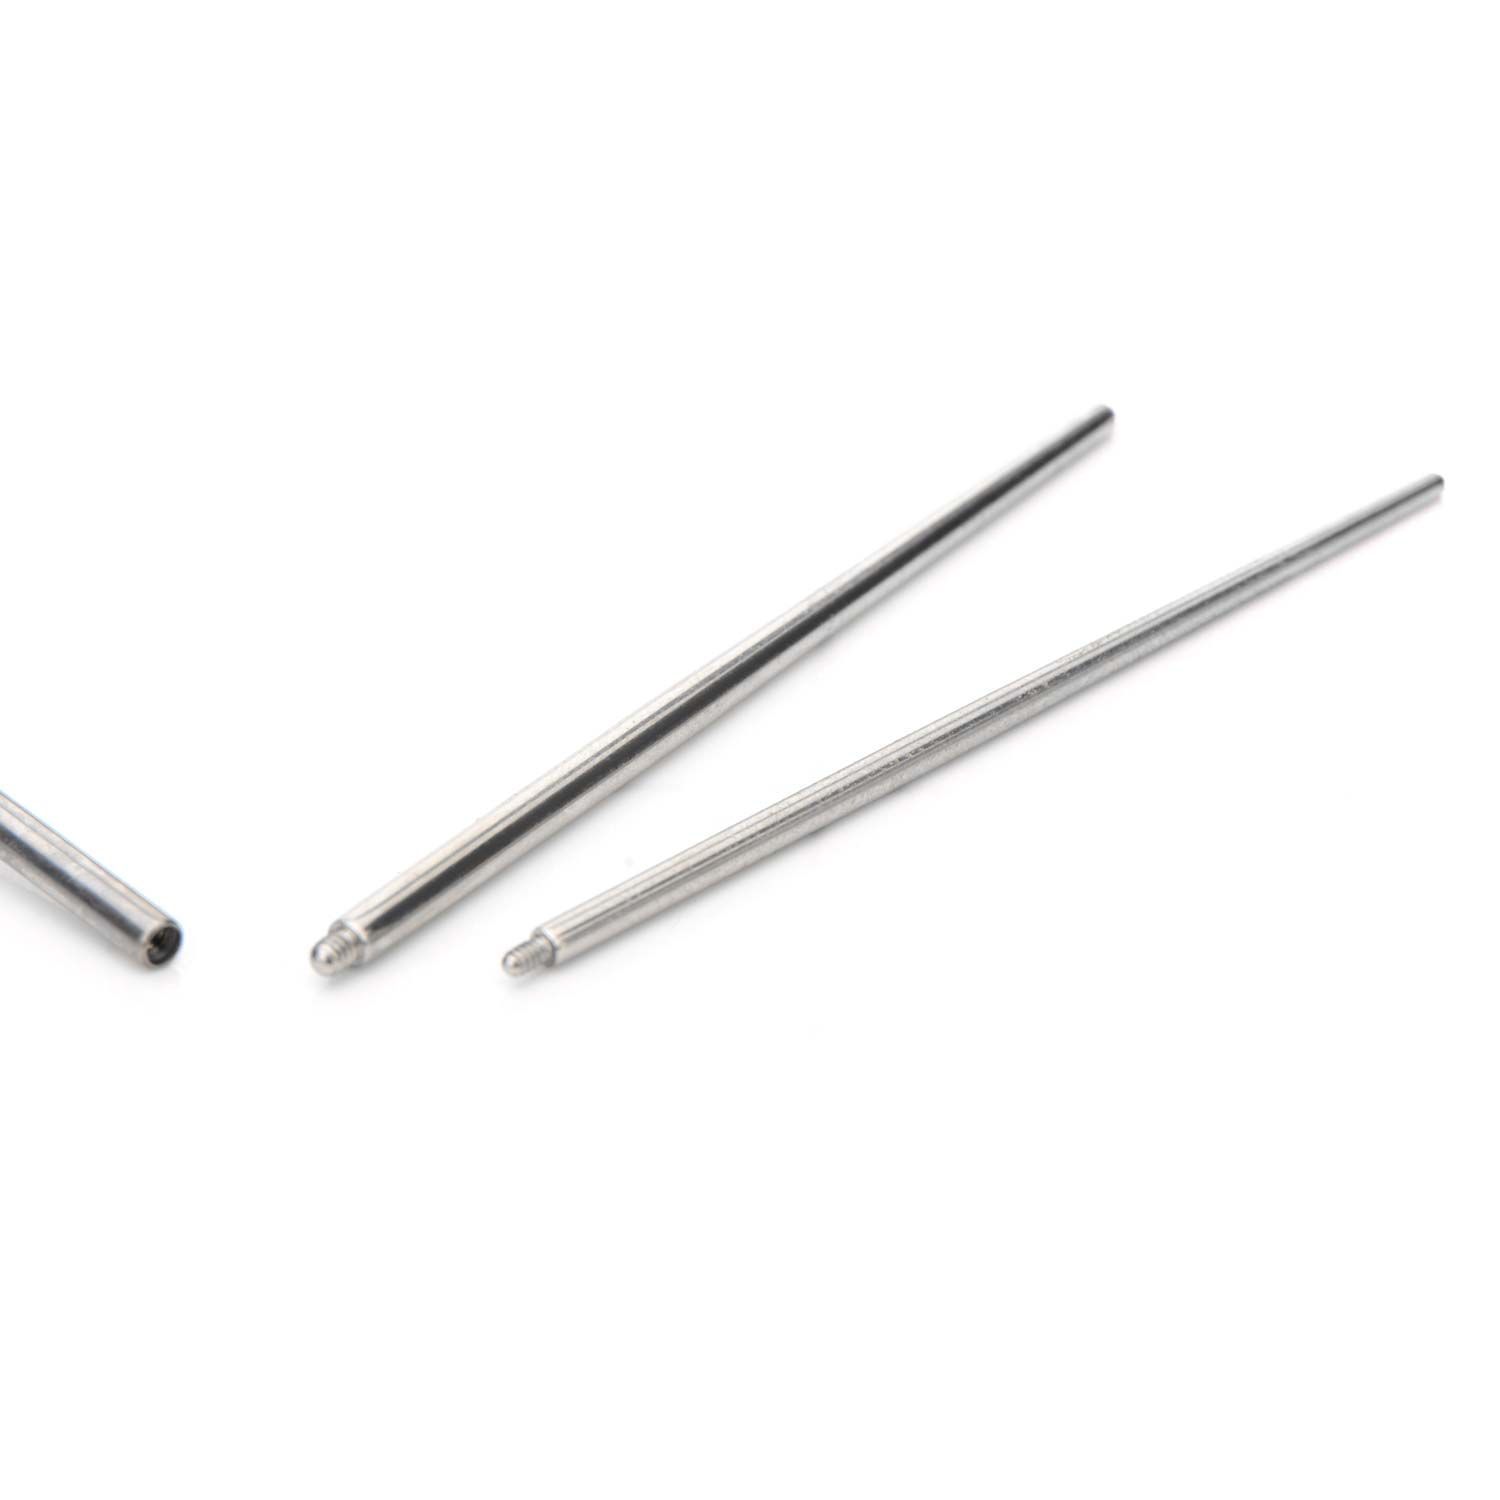 Tapers - Straight Surgical Steel Threaded Insertion Pin Taper For Internally Threaded Jewelry sbvtaspt - 1 Piece -Rebel Bod-RebelBod